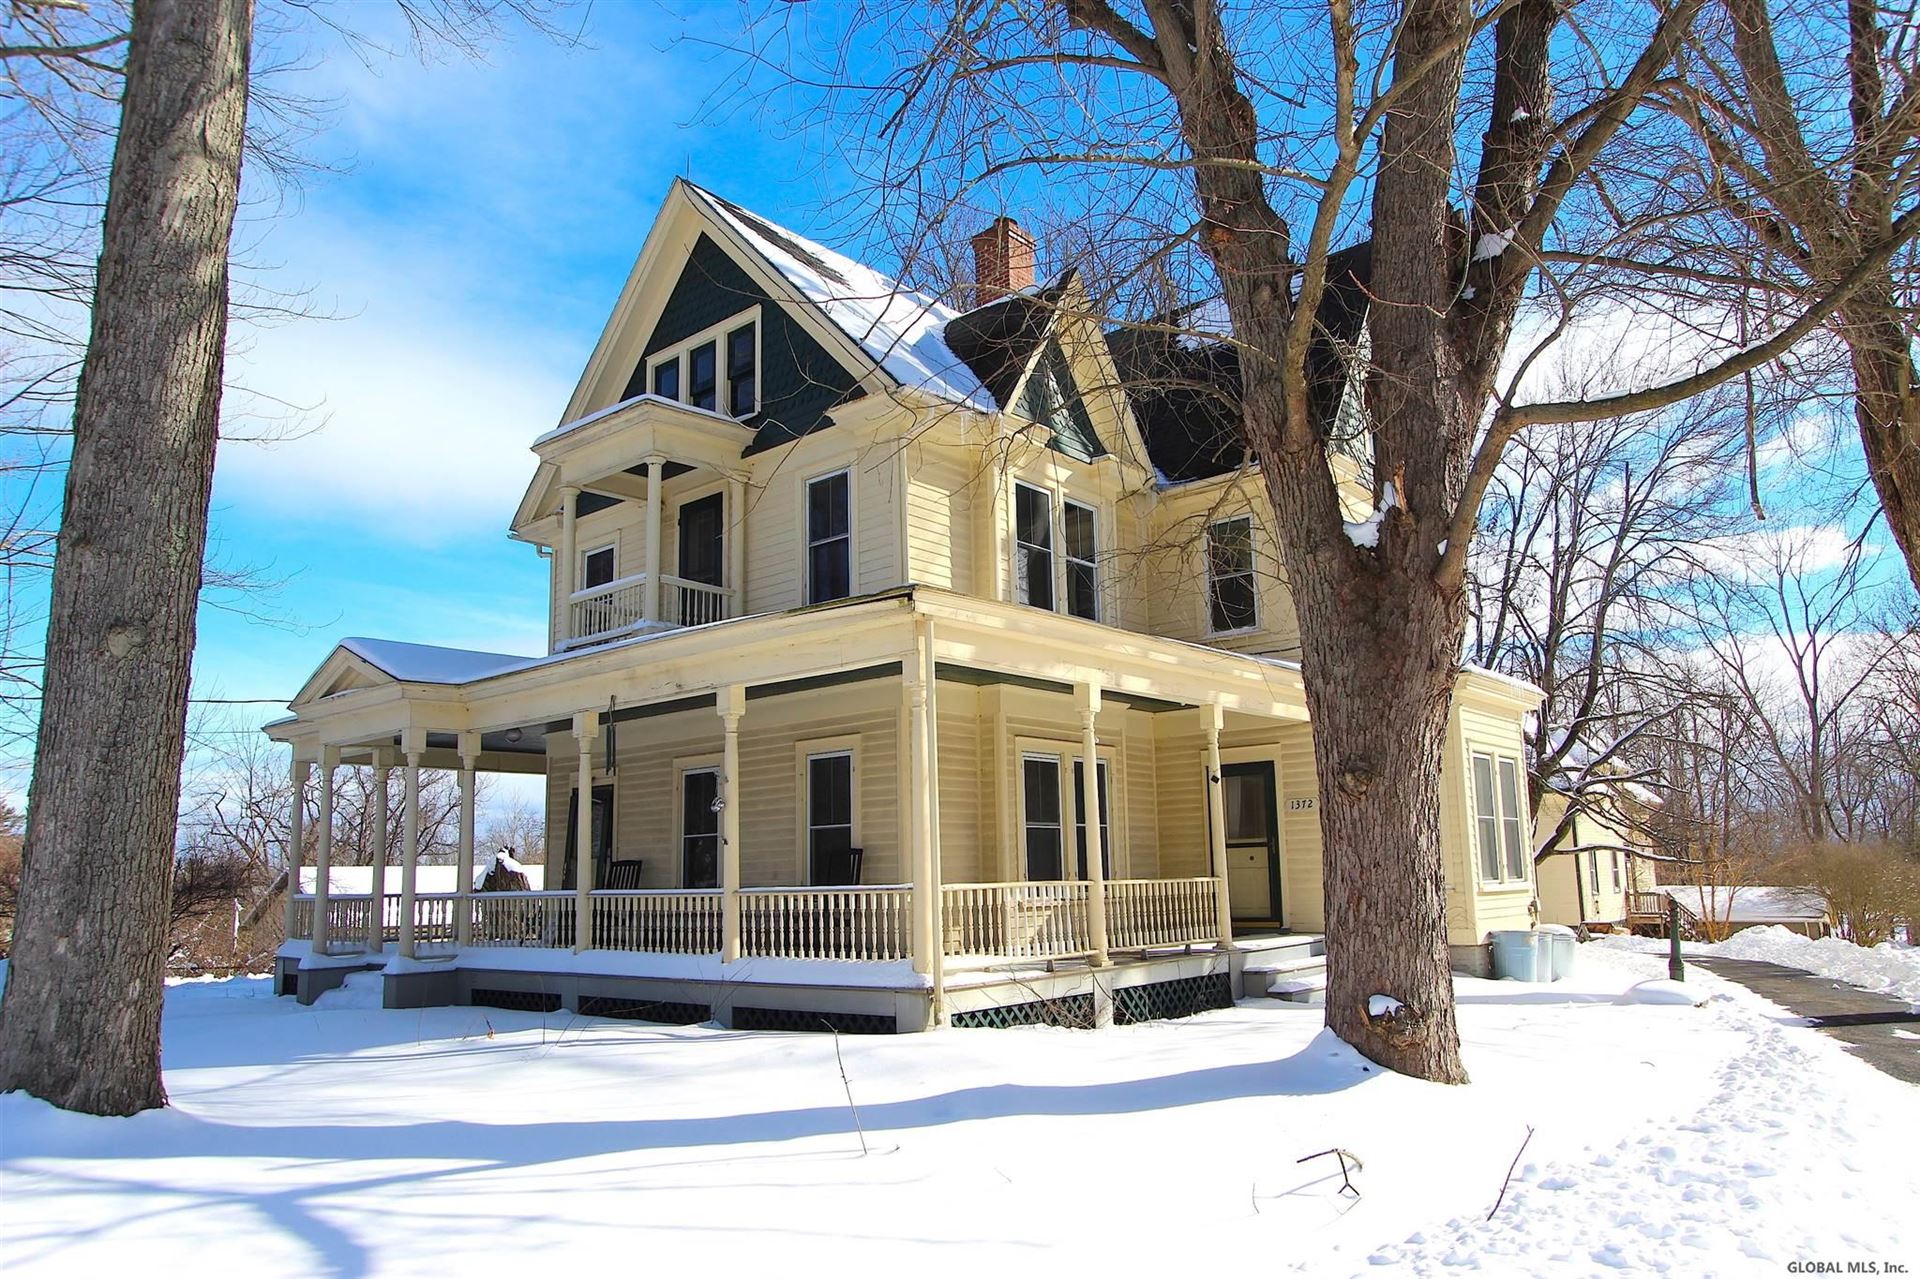 Mixed-Use Victorian in the Capital District, $380K